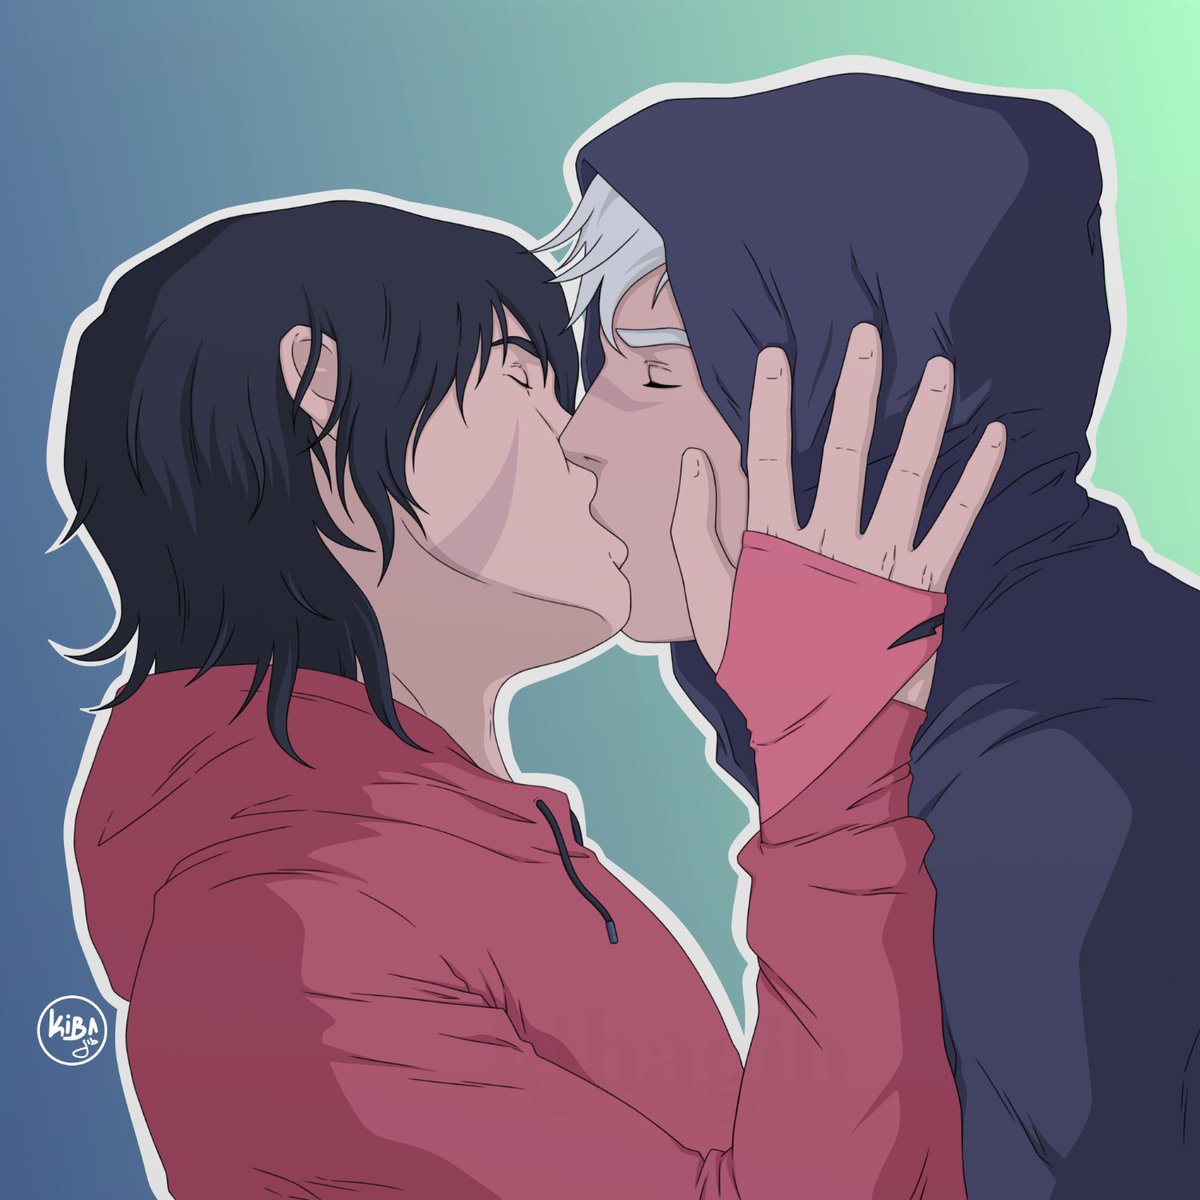 Happy Pride to them, who never gave up on each other ❤️🖤

#sheith